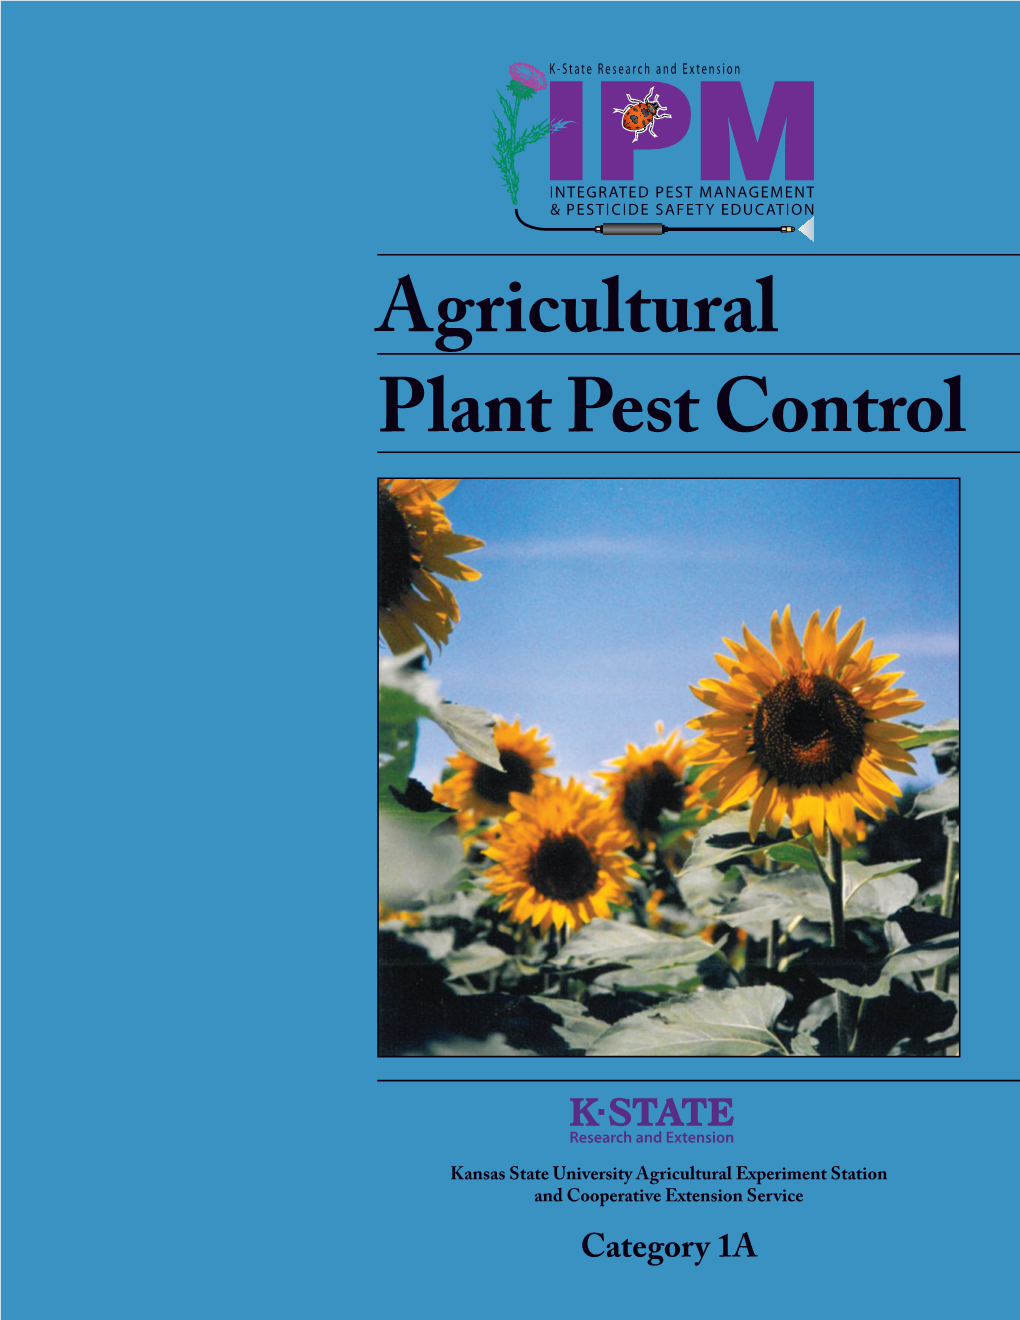 S19 Agricultural Plant Pest Control, Category 1A